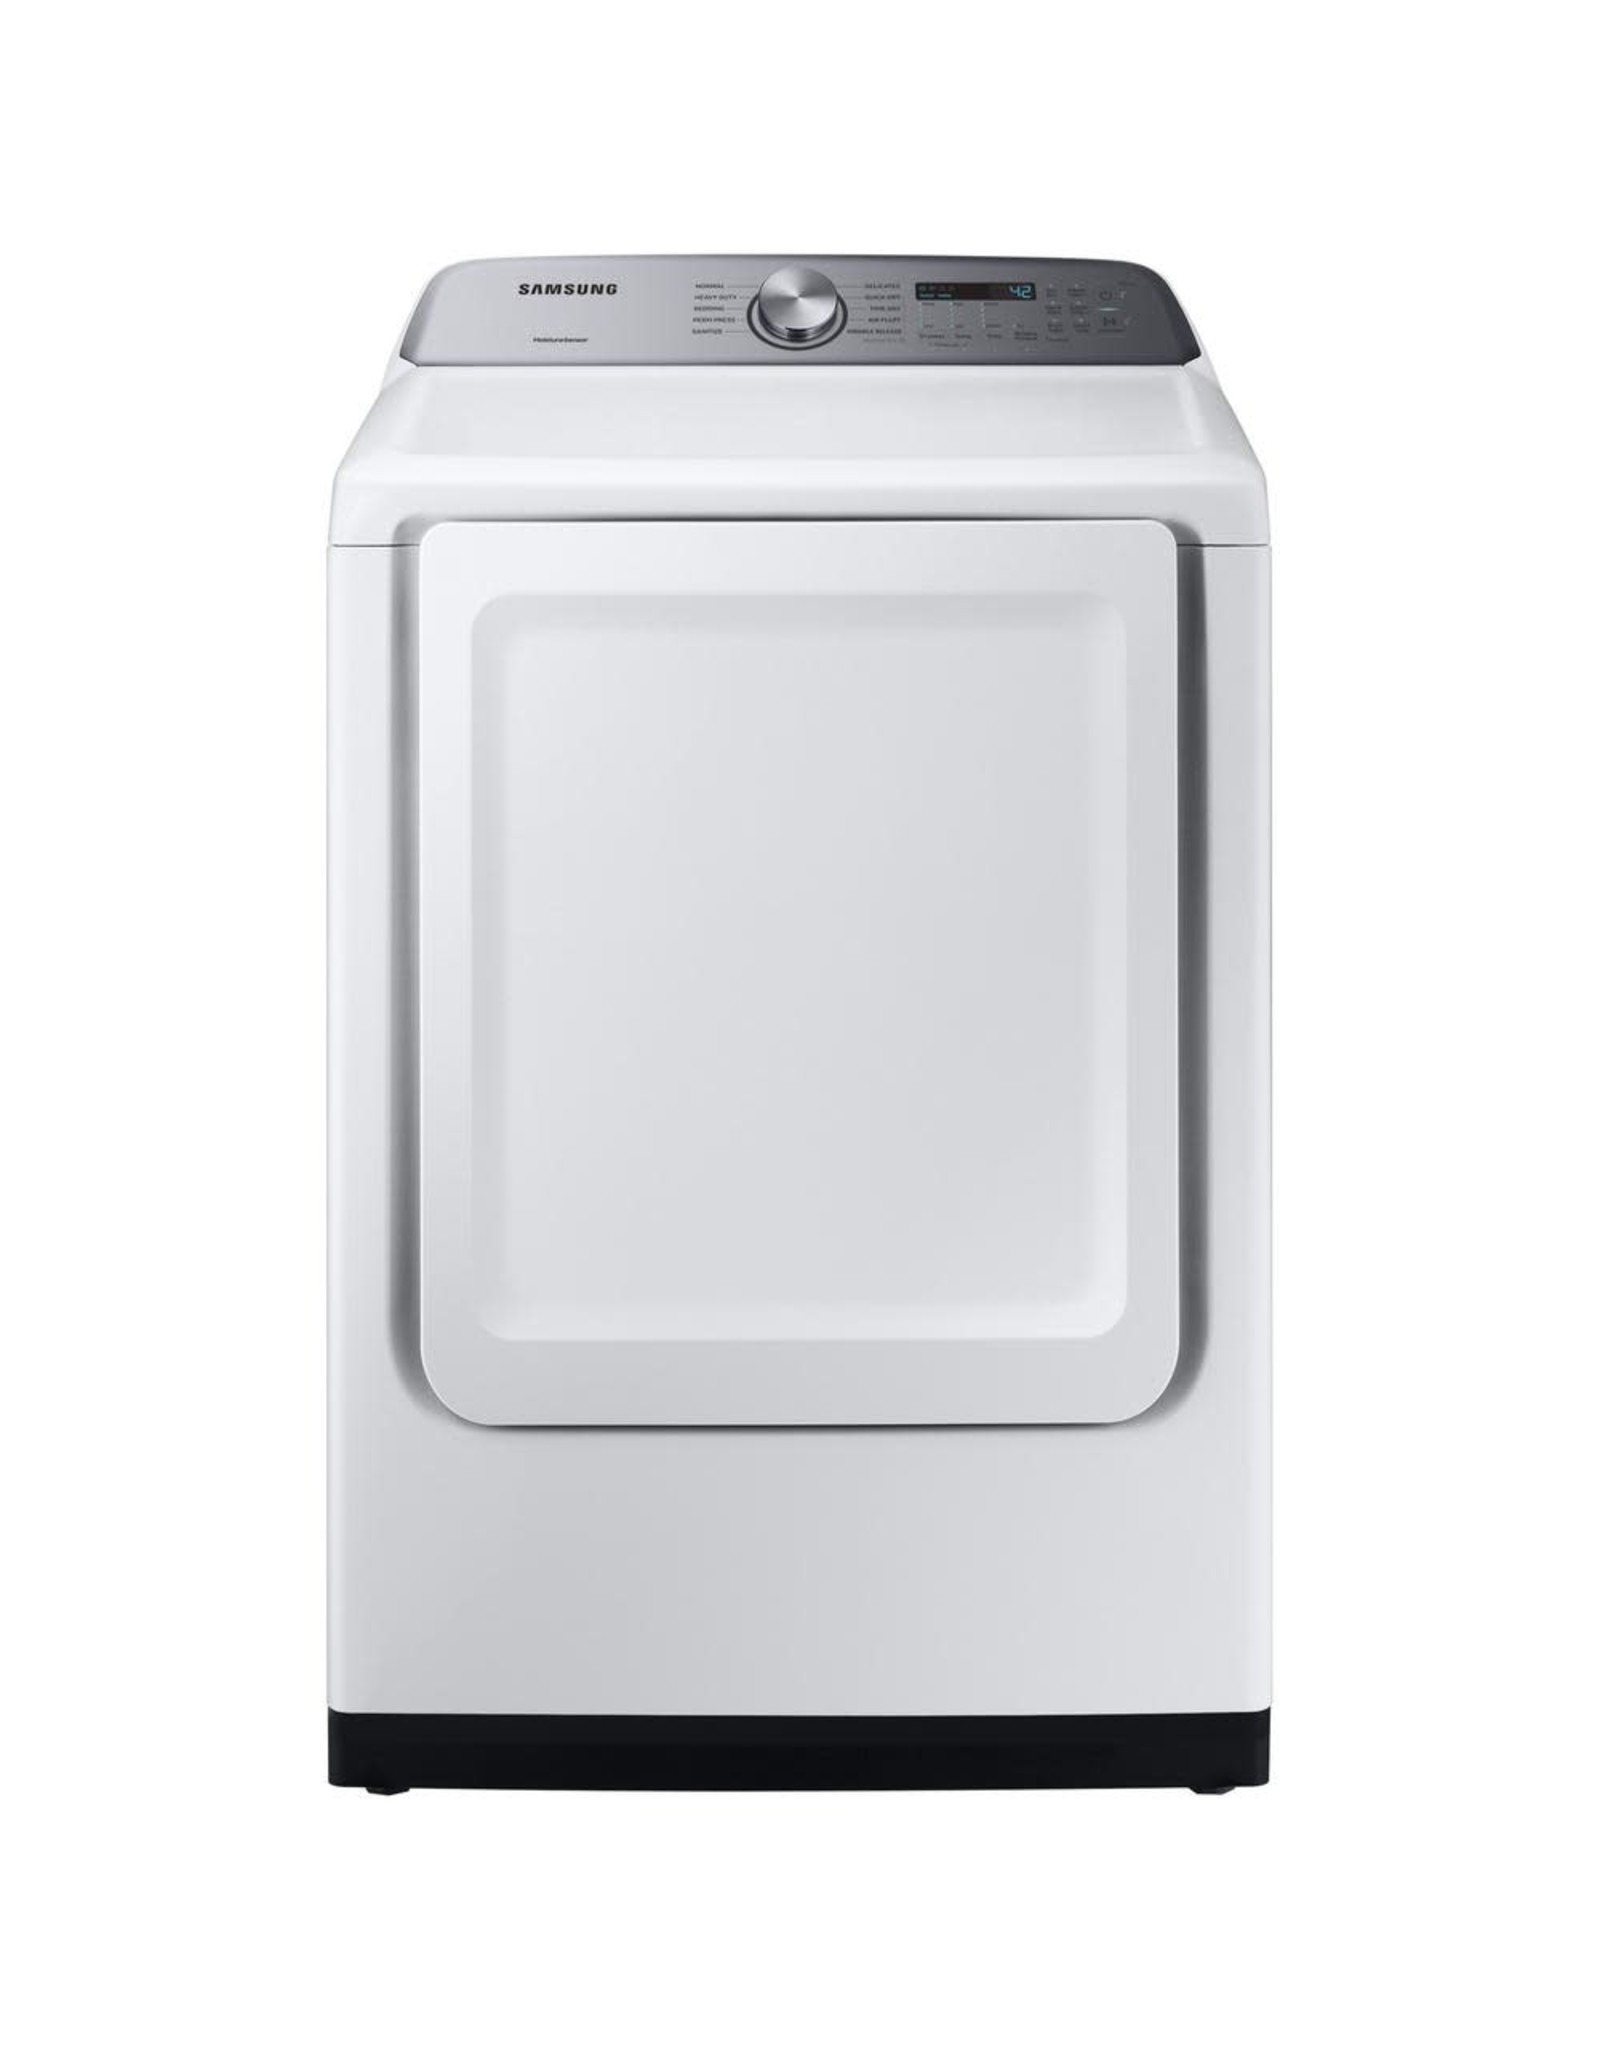 DVE50R5200W 7.4 cu. ft. White Electric Dryer with Sensor Dry